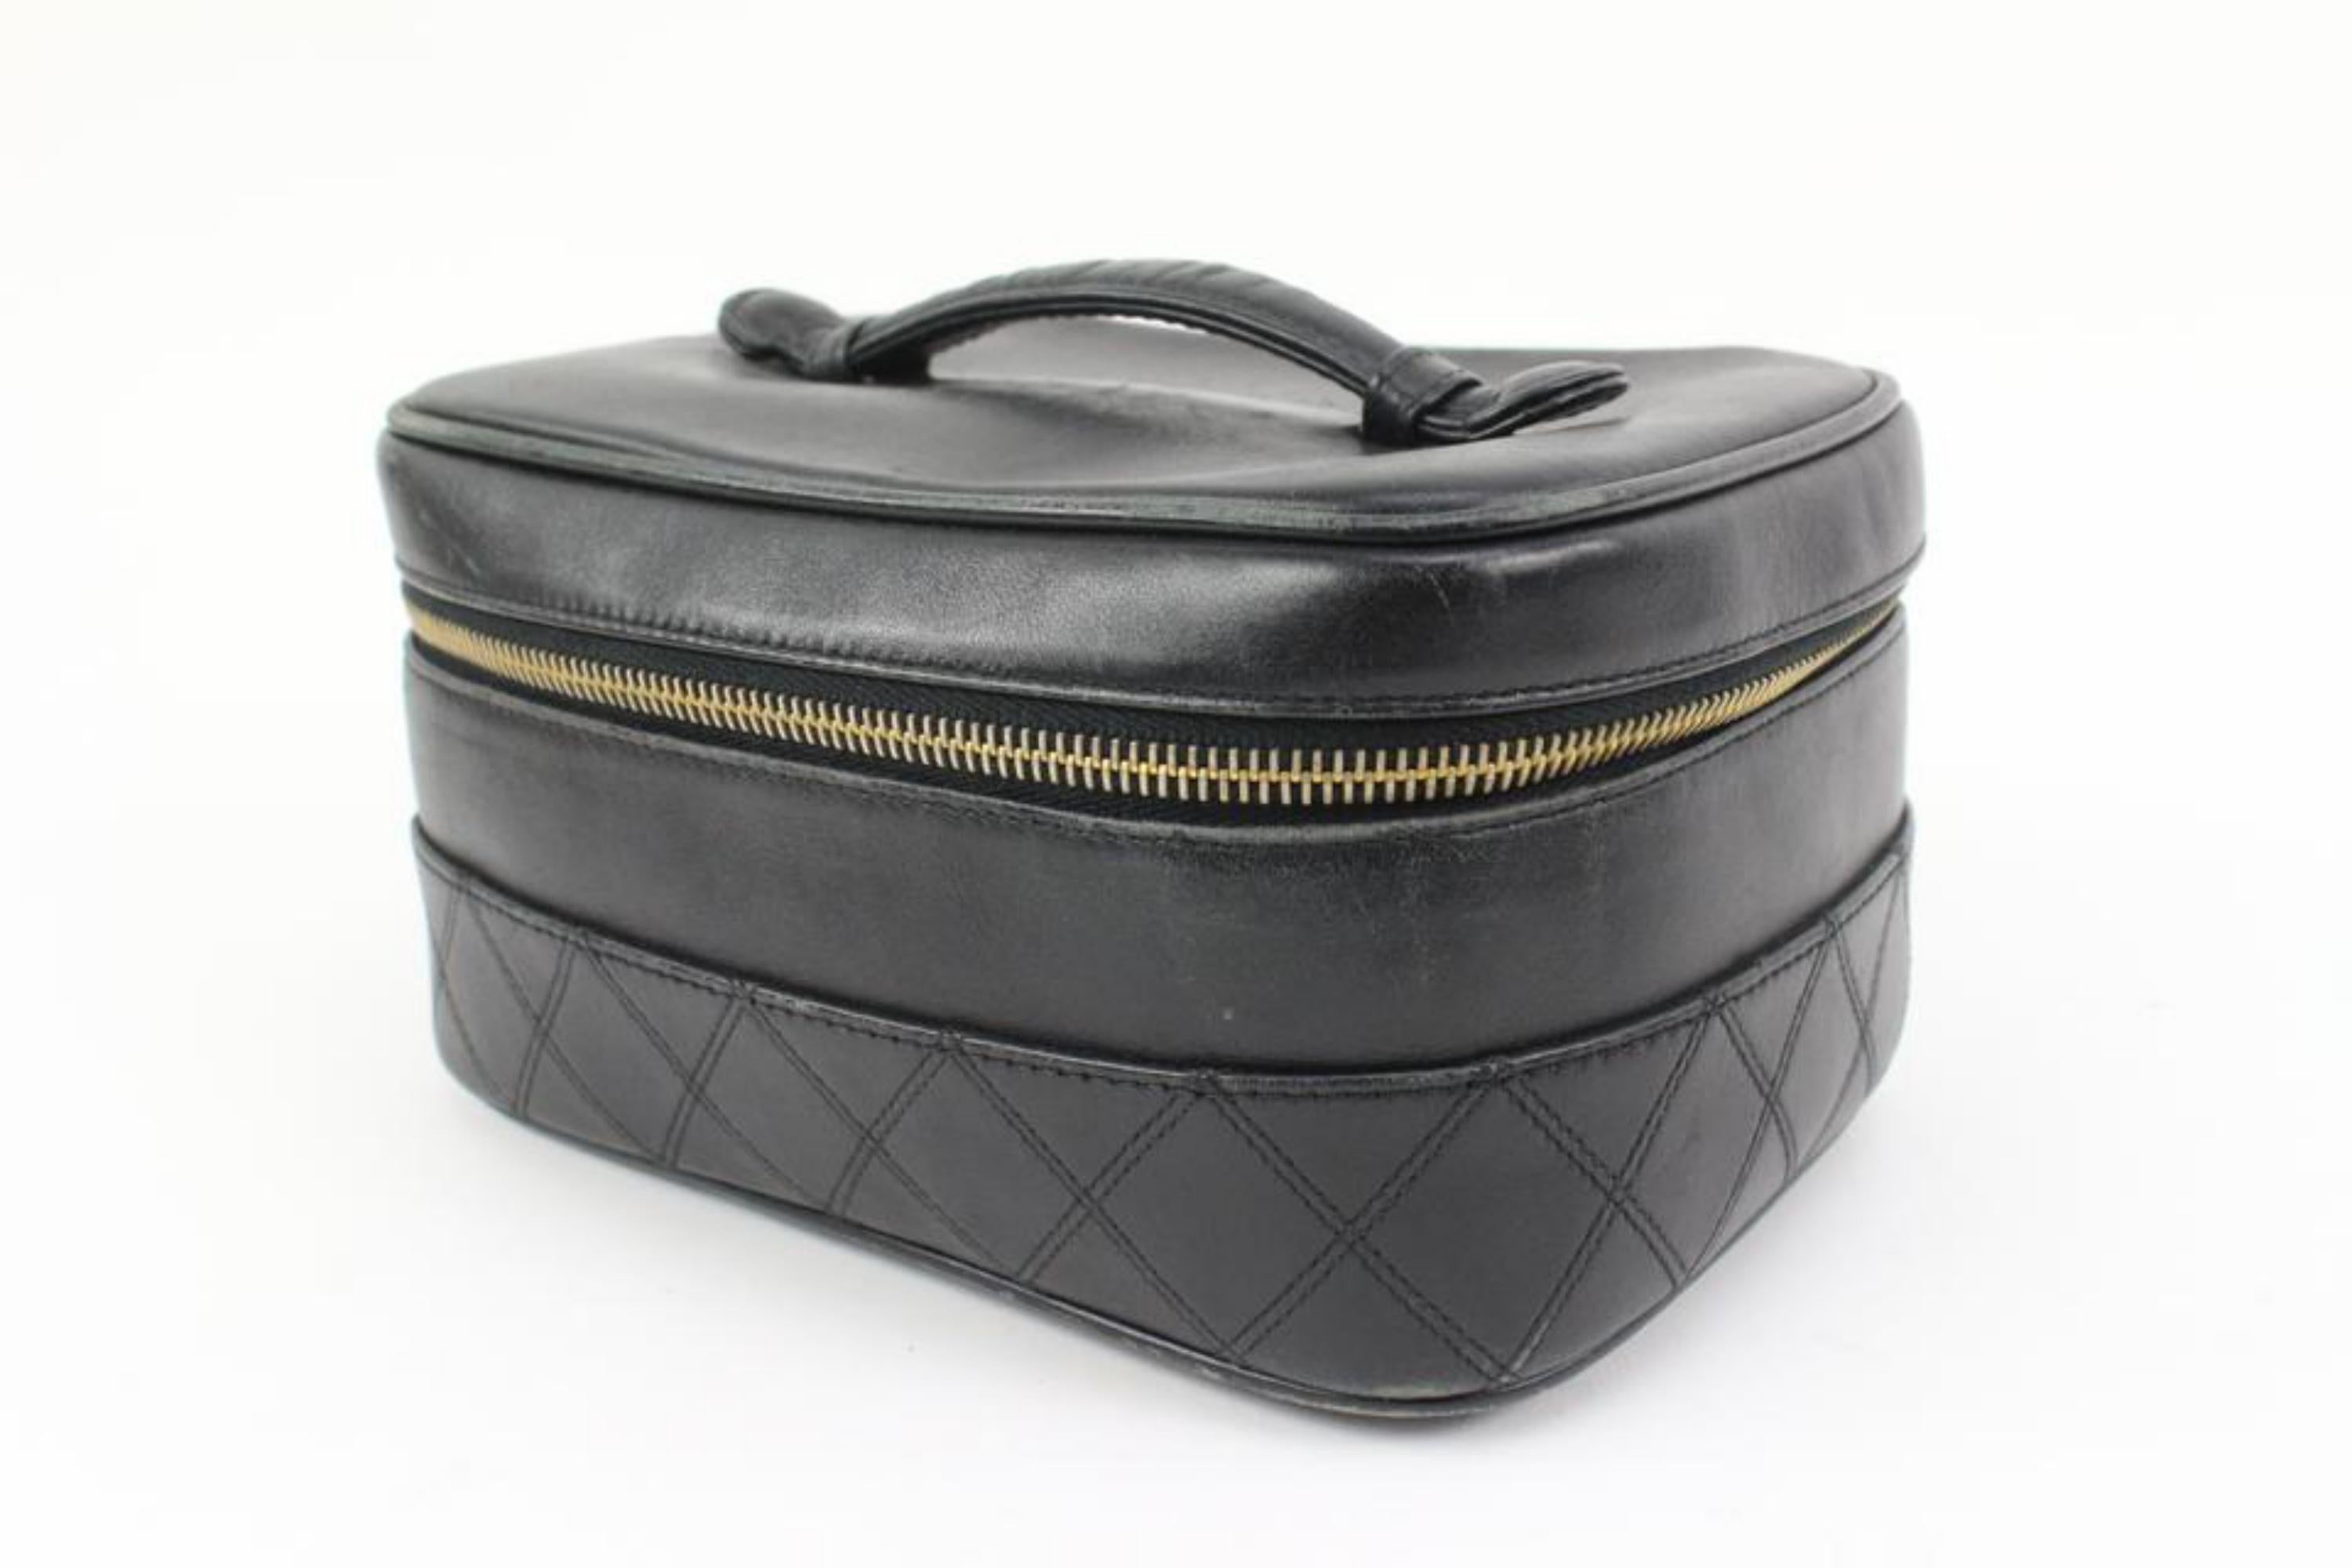 Chanel Black Quilted Lambskin Horizontal Vanity Case 18ck311s
Date Code/Serial Number: Rubbed Off
Made In: Italy
Measurements: Length:  7.5